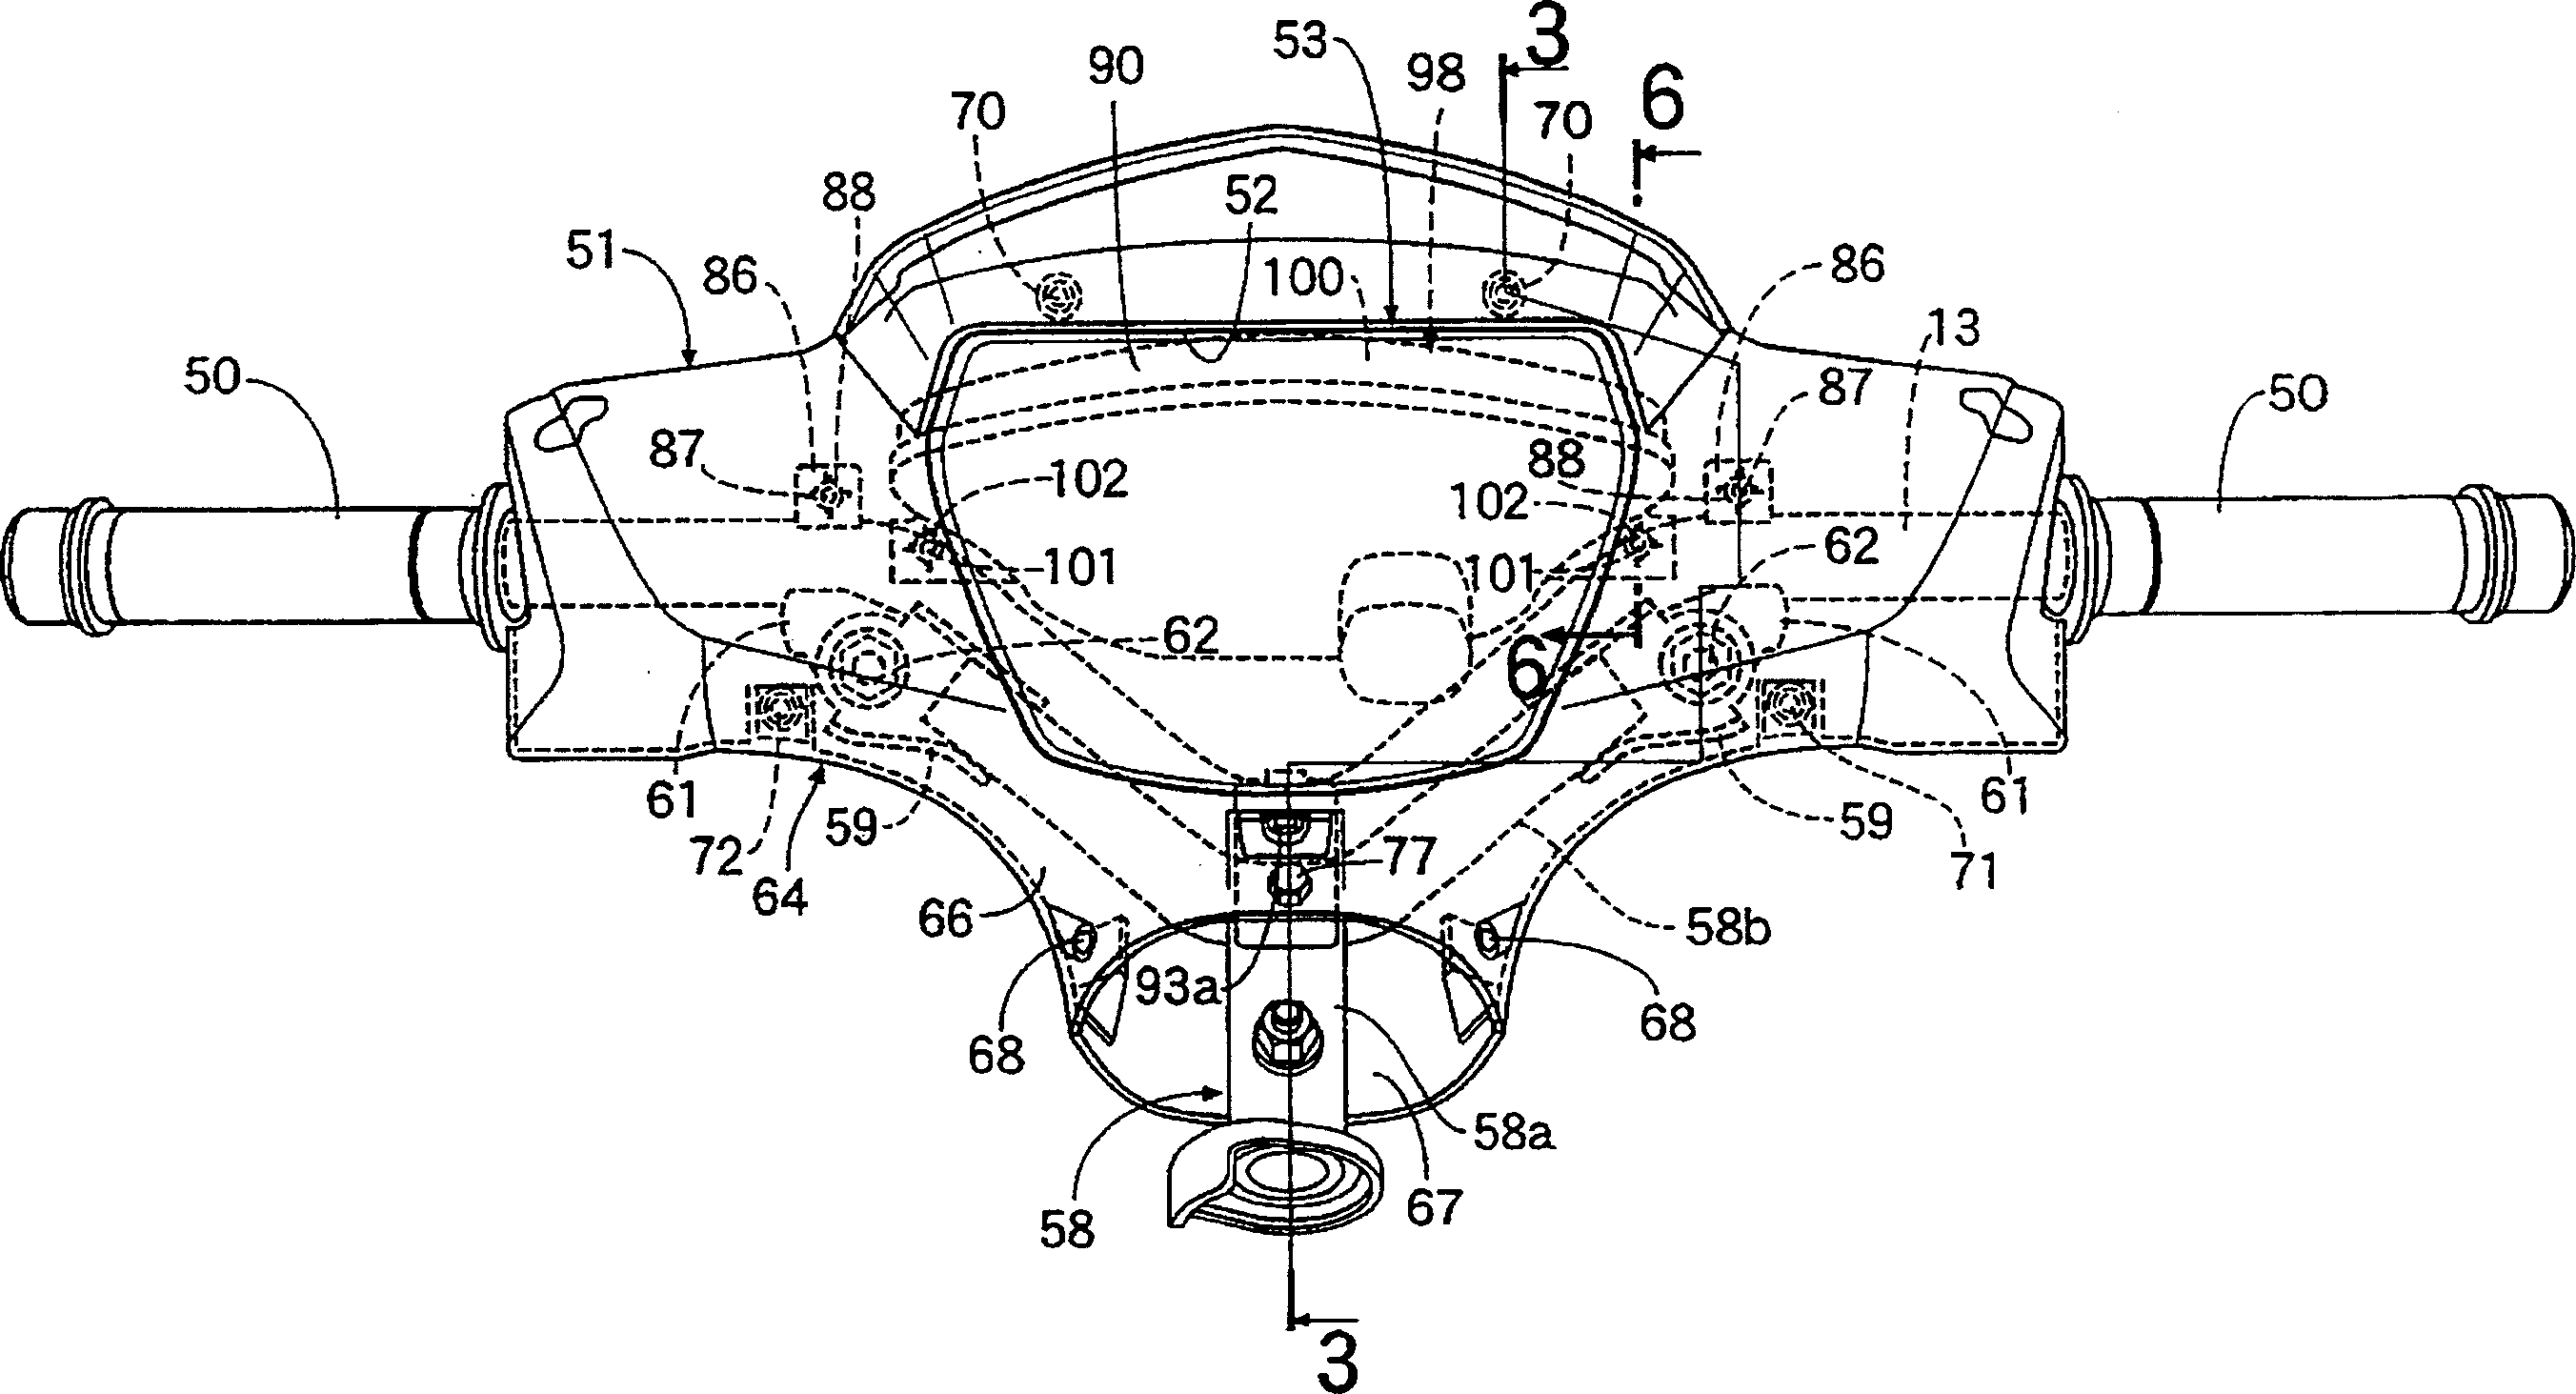 Handle cover apparatus for a motorcycle